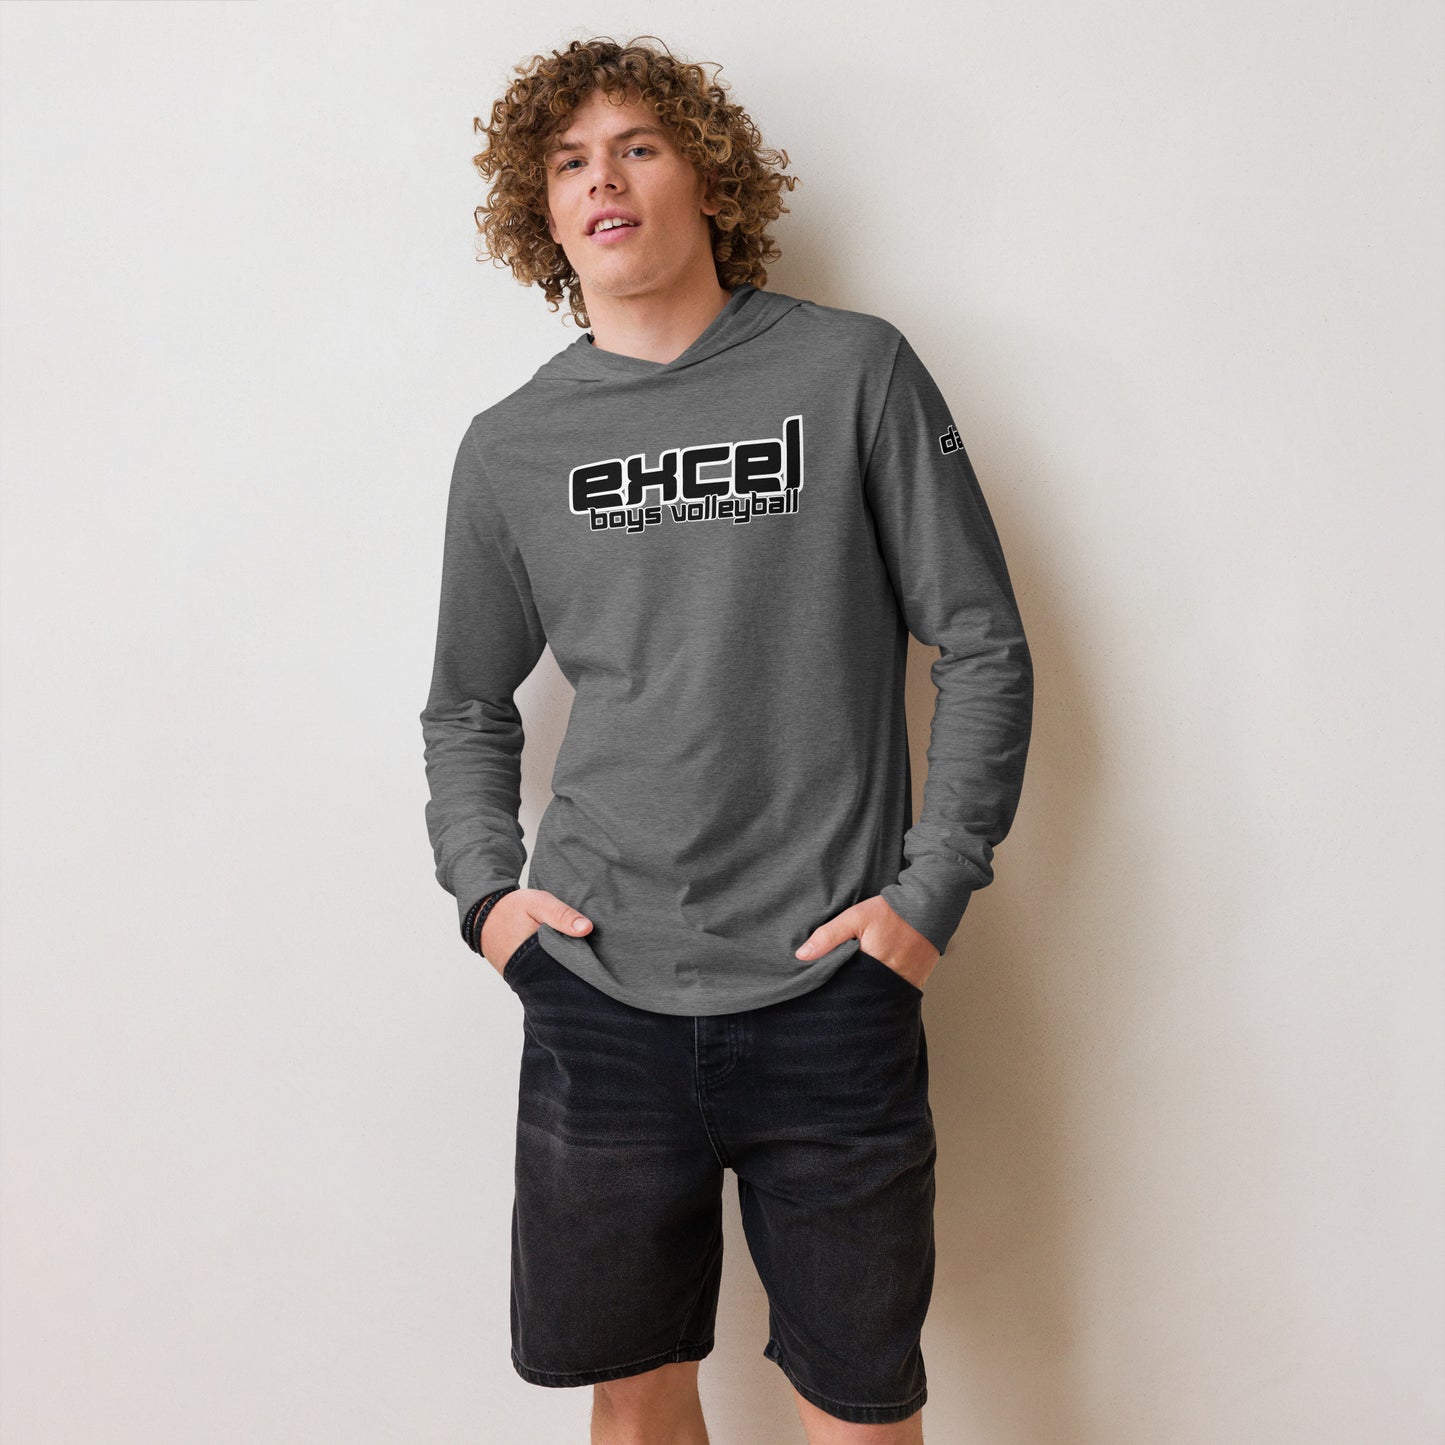 UPDATED - Excel Boys Volleyball - Dad - Hooded long-sleeve tee